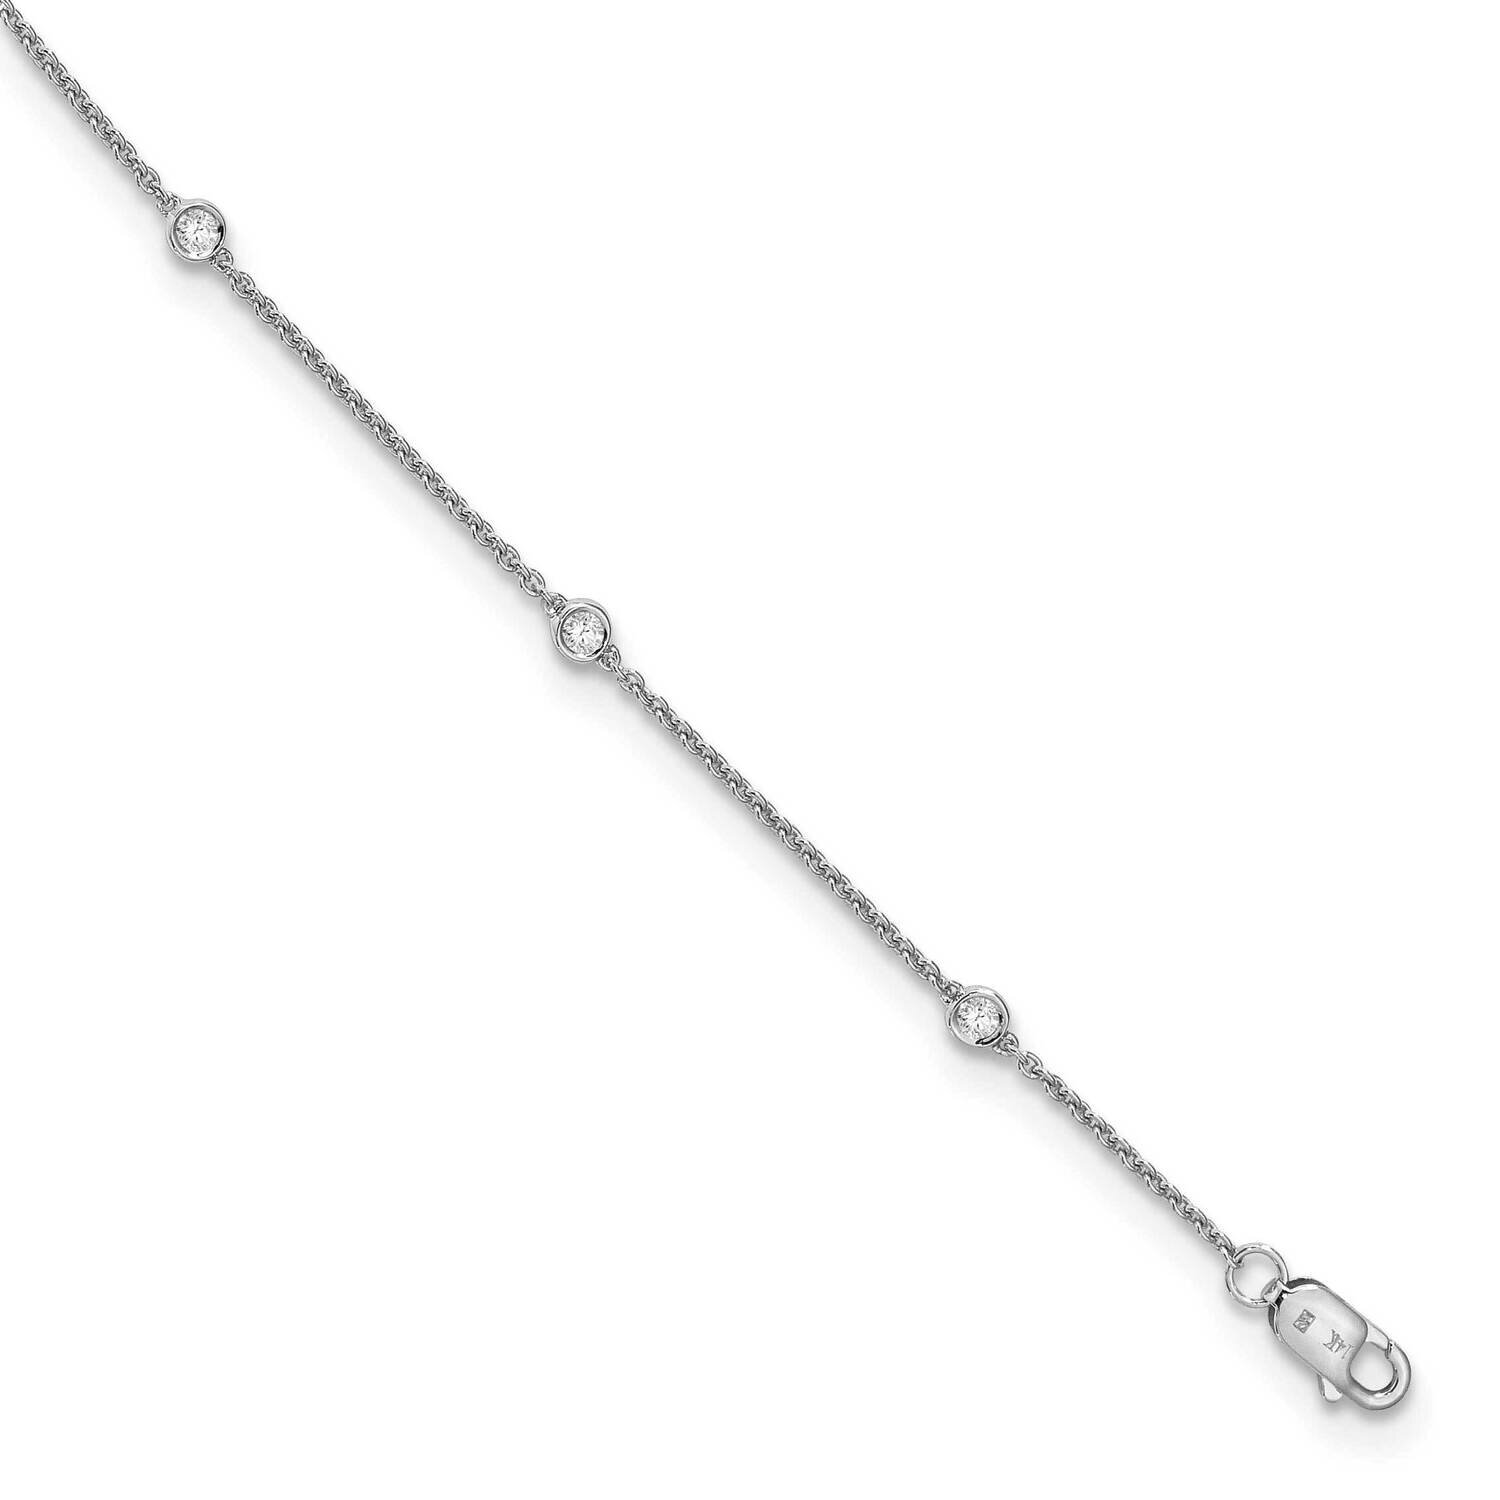 Vs/Si, D E F, Cable Station Anklet 14k White Gold Lab Grown Diamond PM1007-021-WLD-9